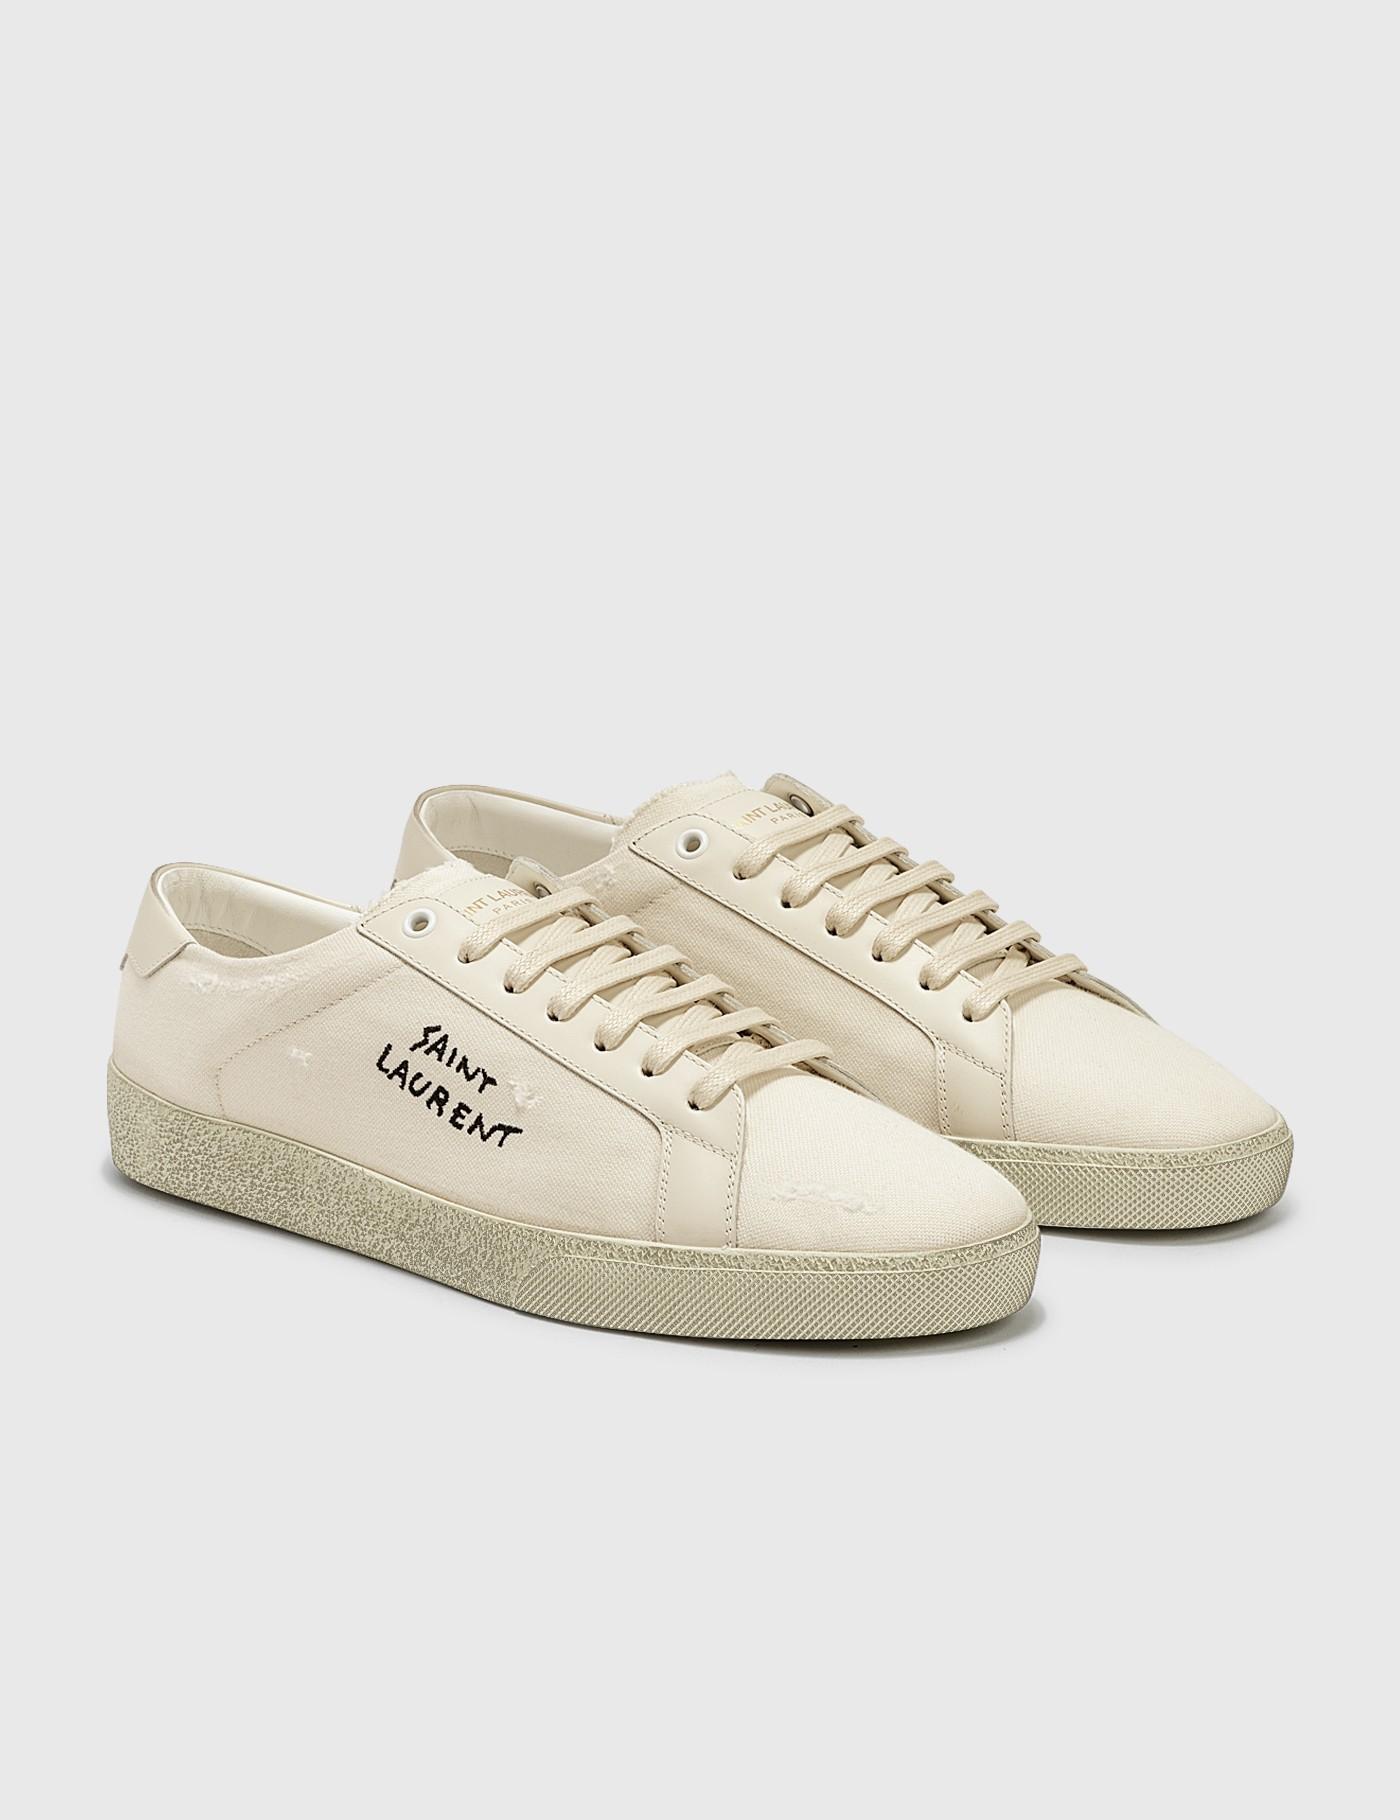 Saint Laurent Canvas Court Classic Sl/06 Embroidered Sneaker in White ...